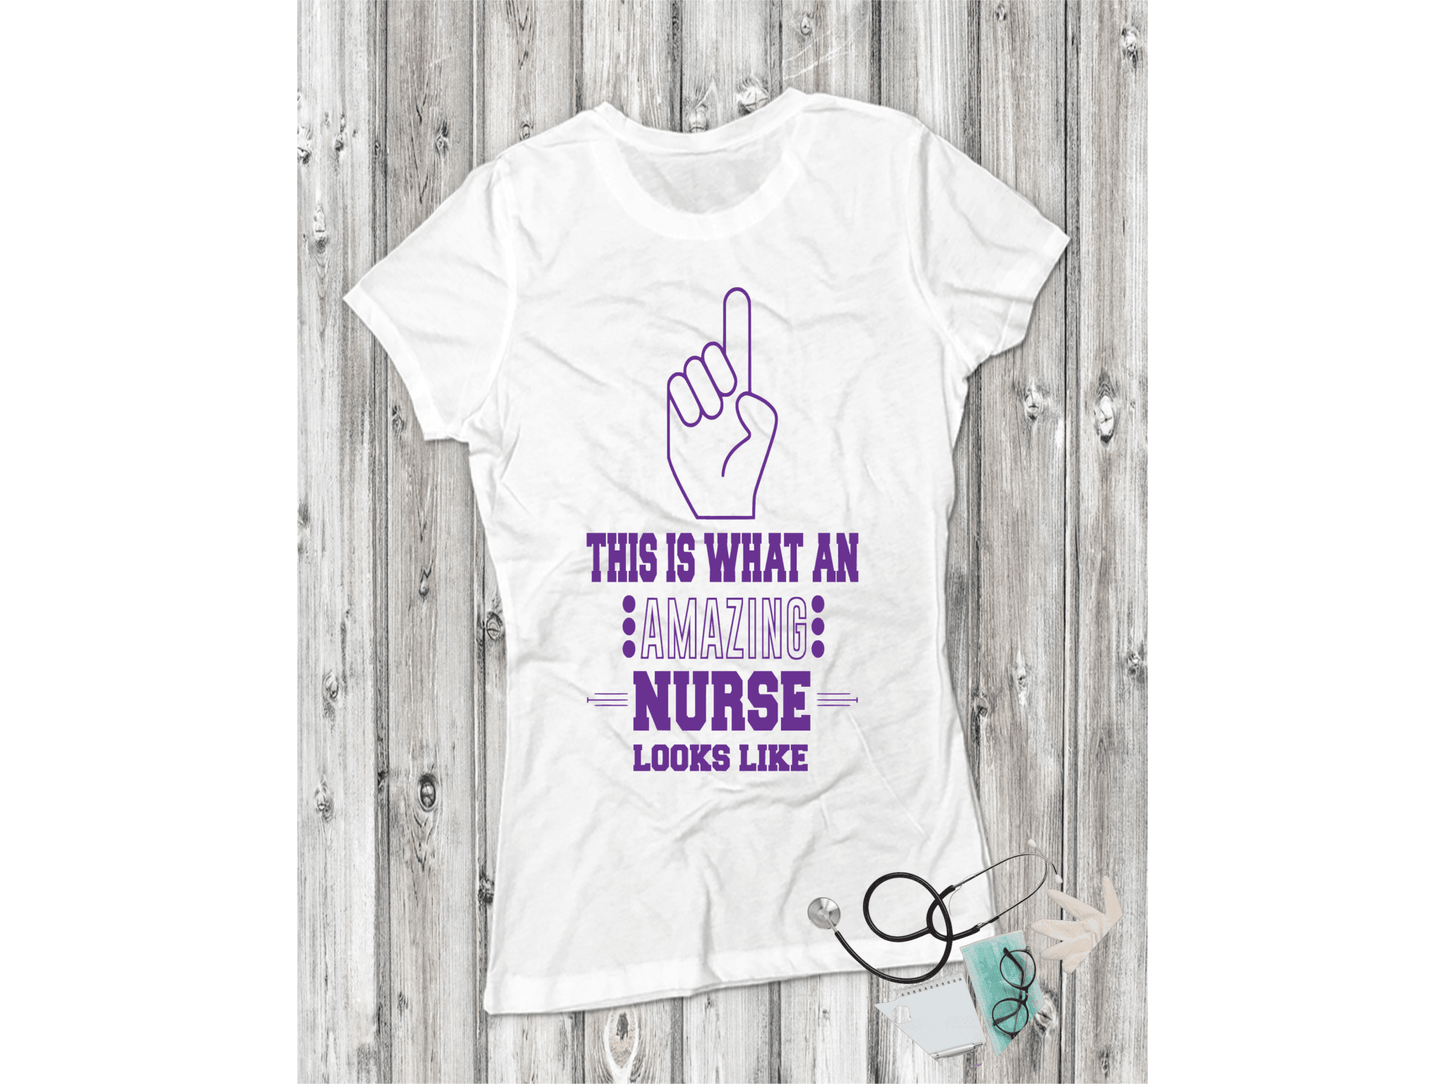 This is what an amazing nurse looks like t-shirt